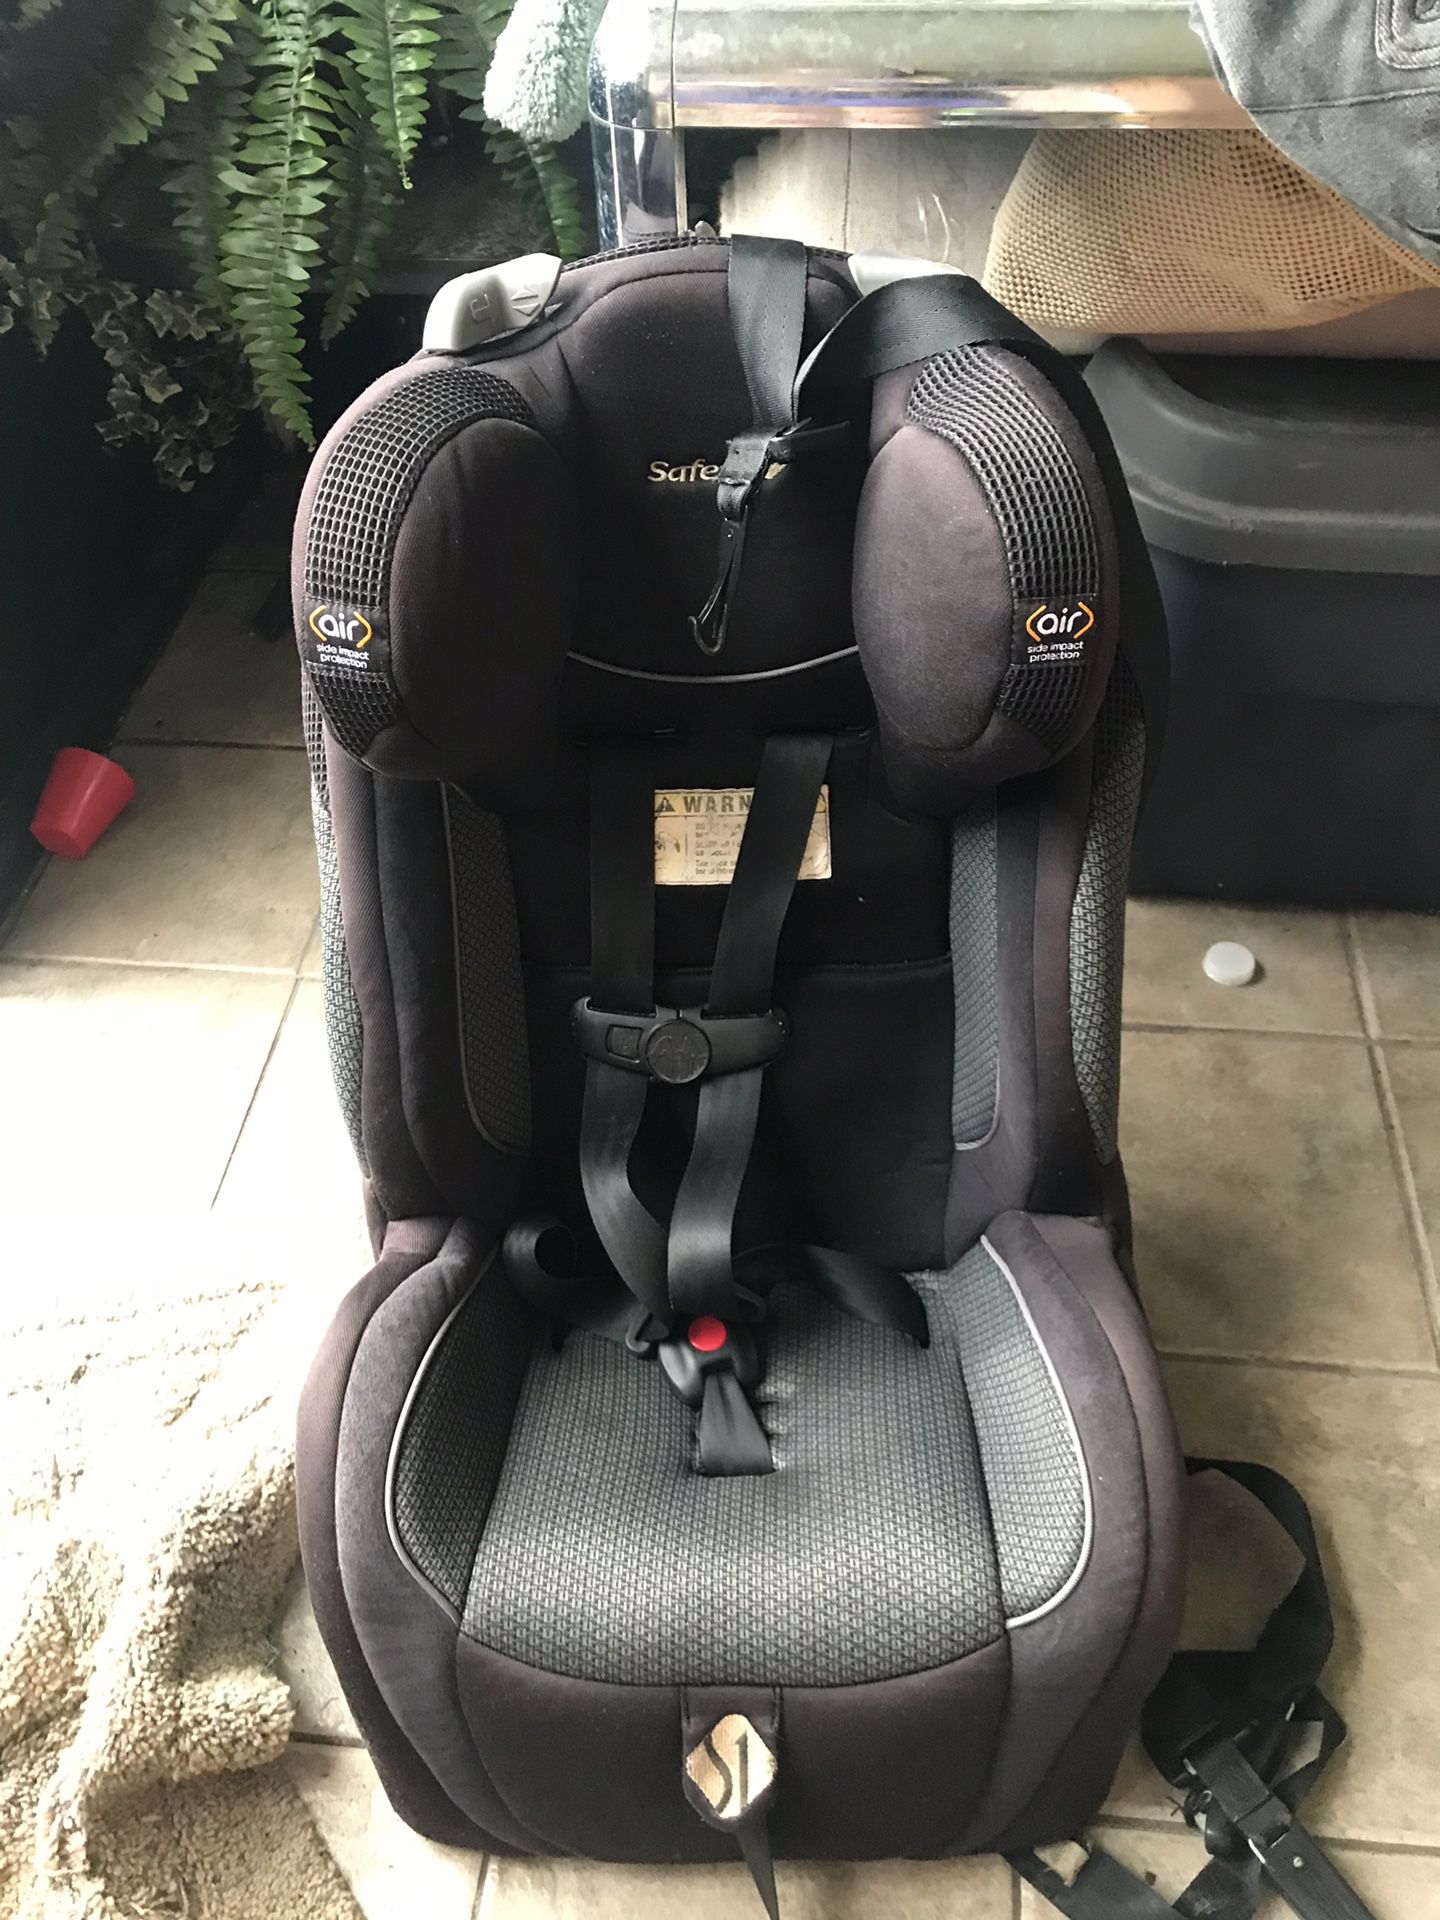 safety first car seat